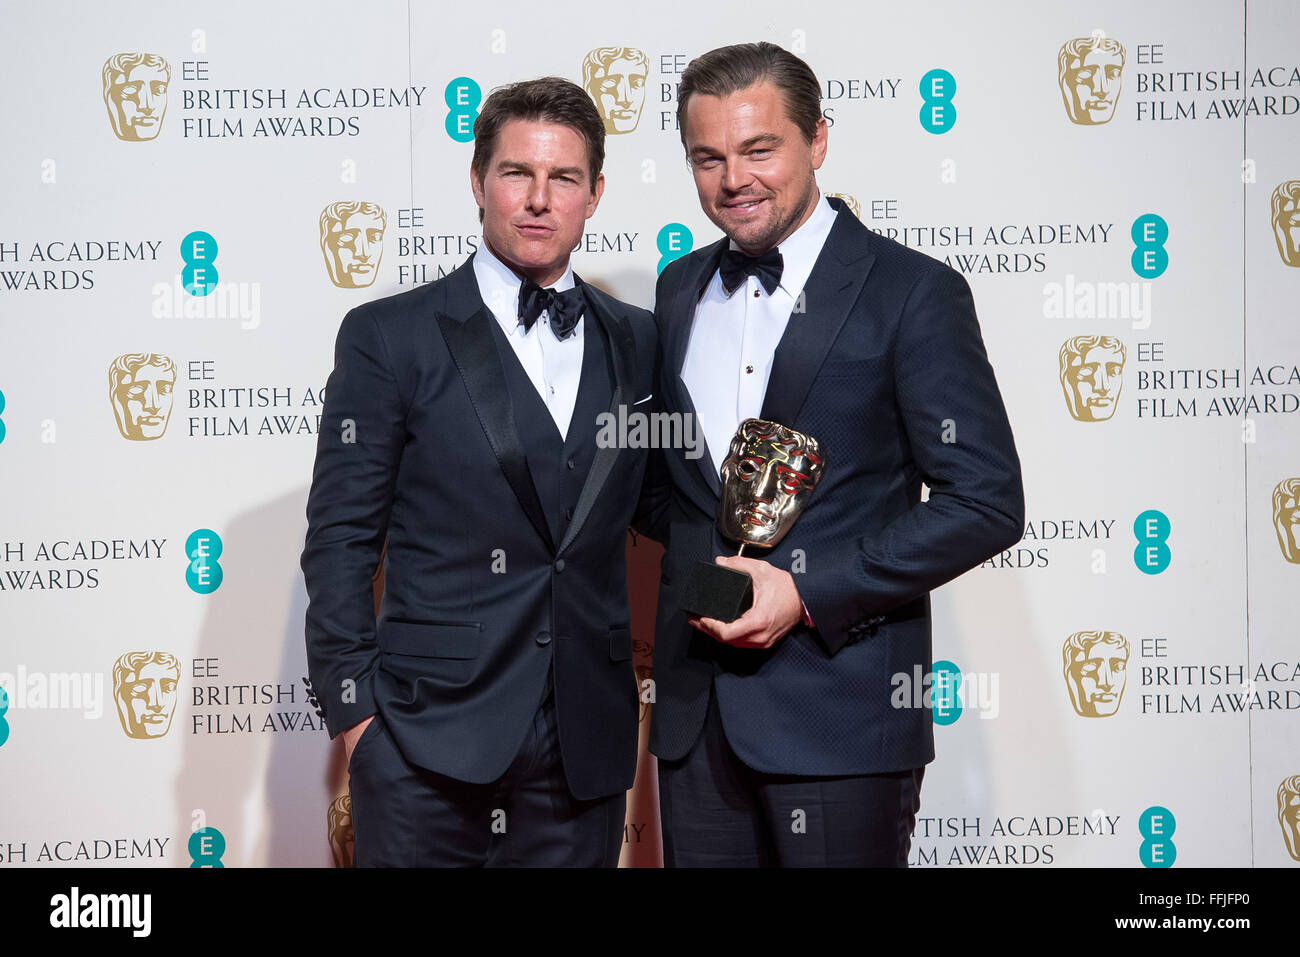 London, UK. 14th February, 2016. Actors Tom Cruise (L) and Leonardo DiCaprio  pose in the press room of the EE British Academy Film Awards, BAFTA Awards,  at the Royal Opera House in